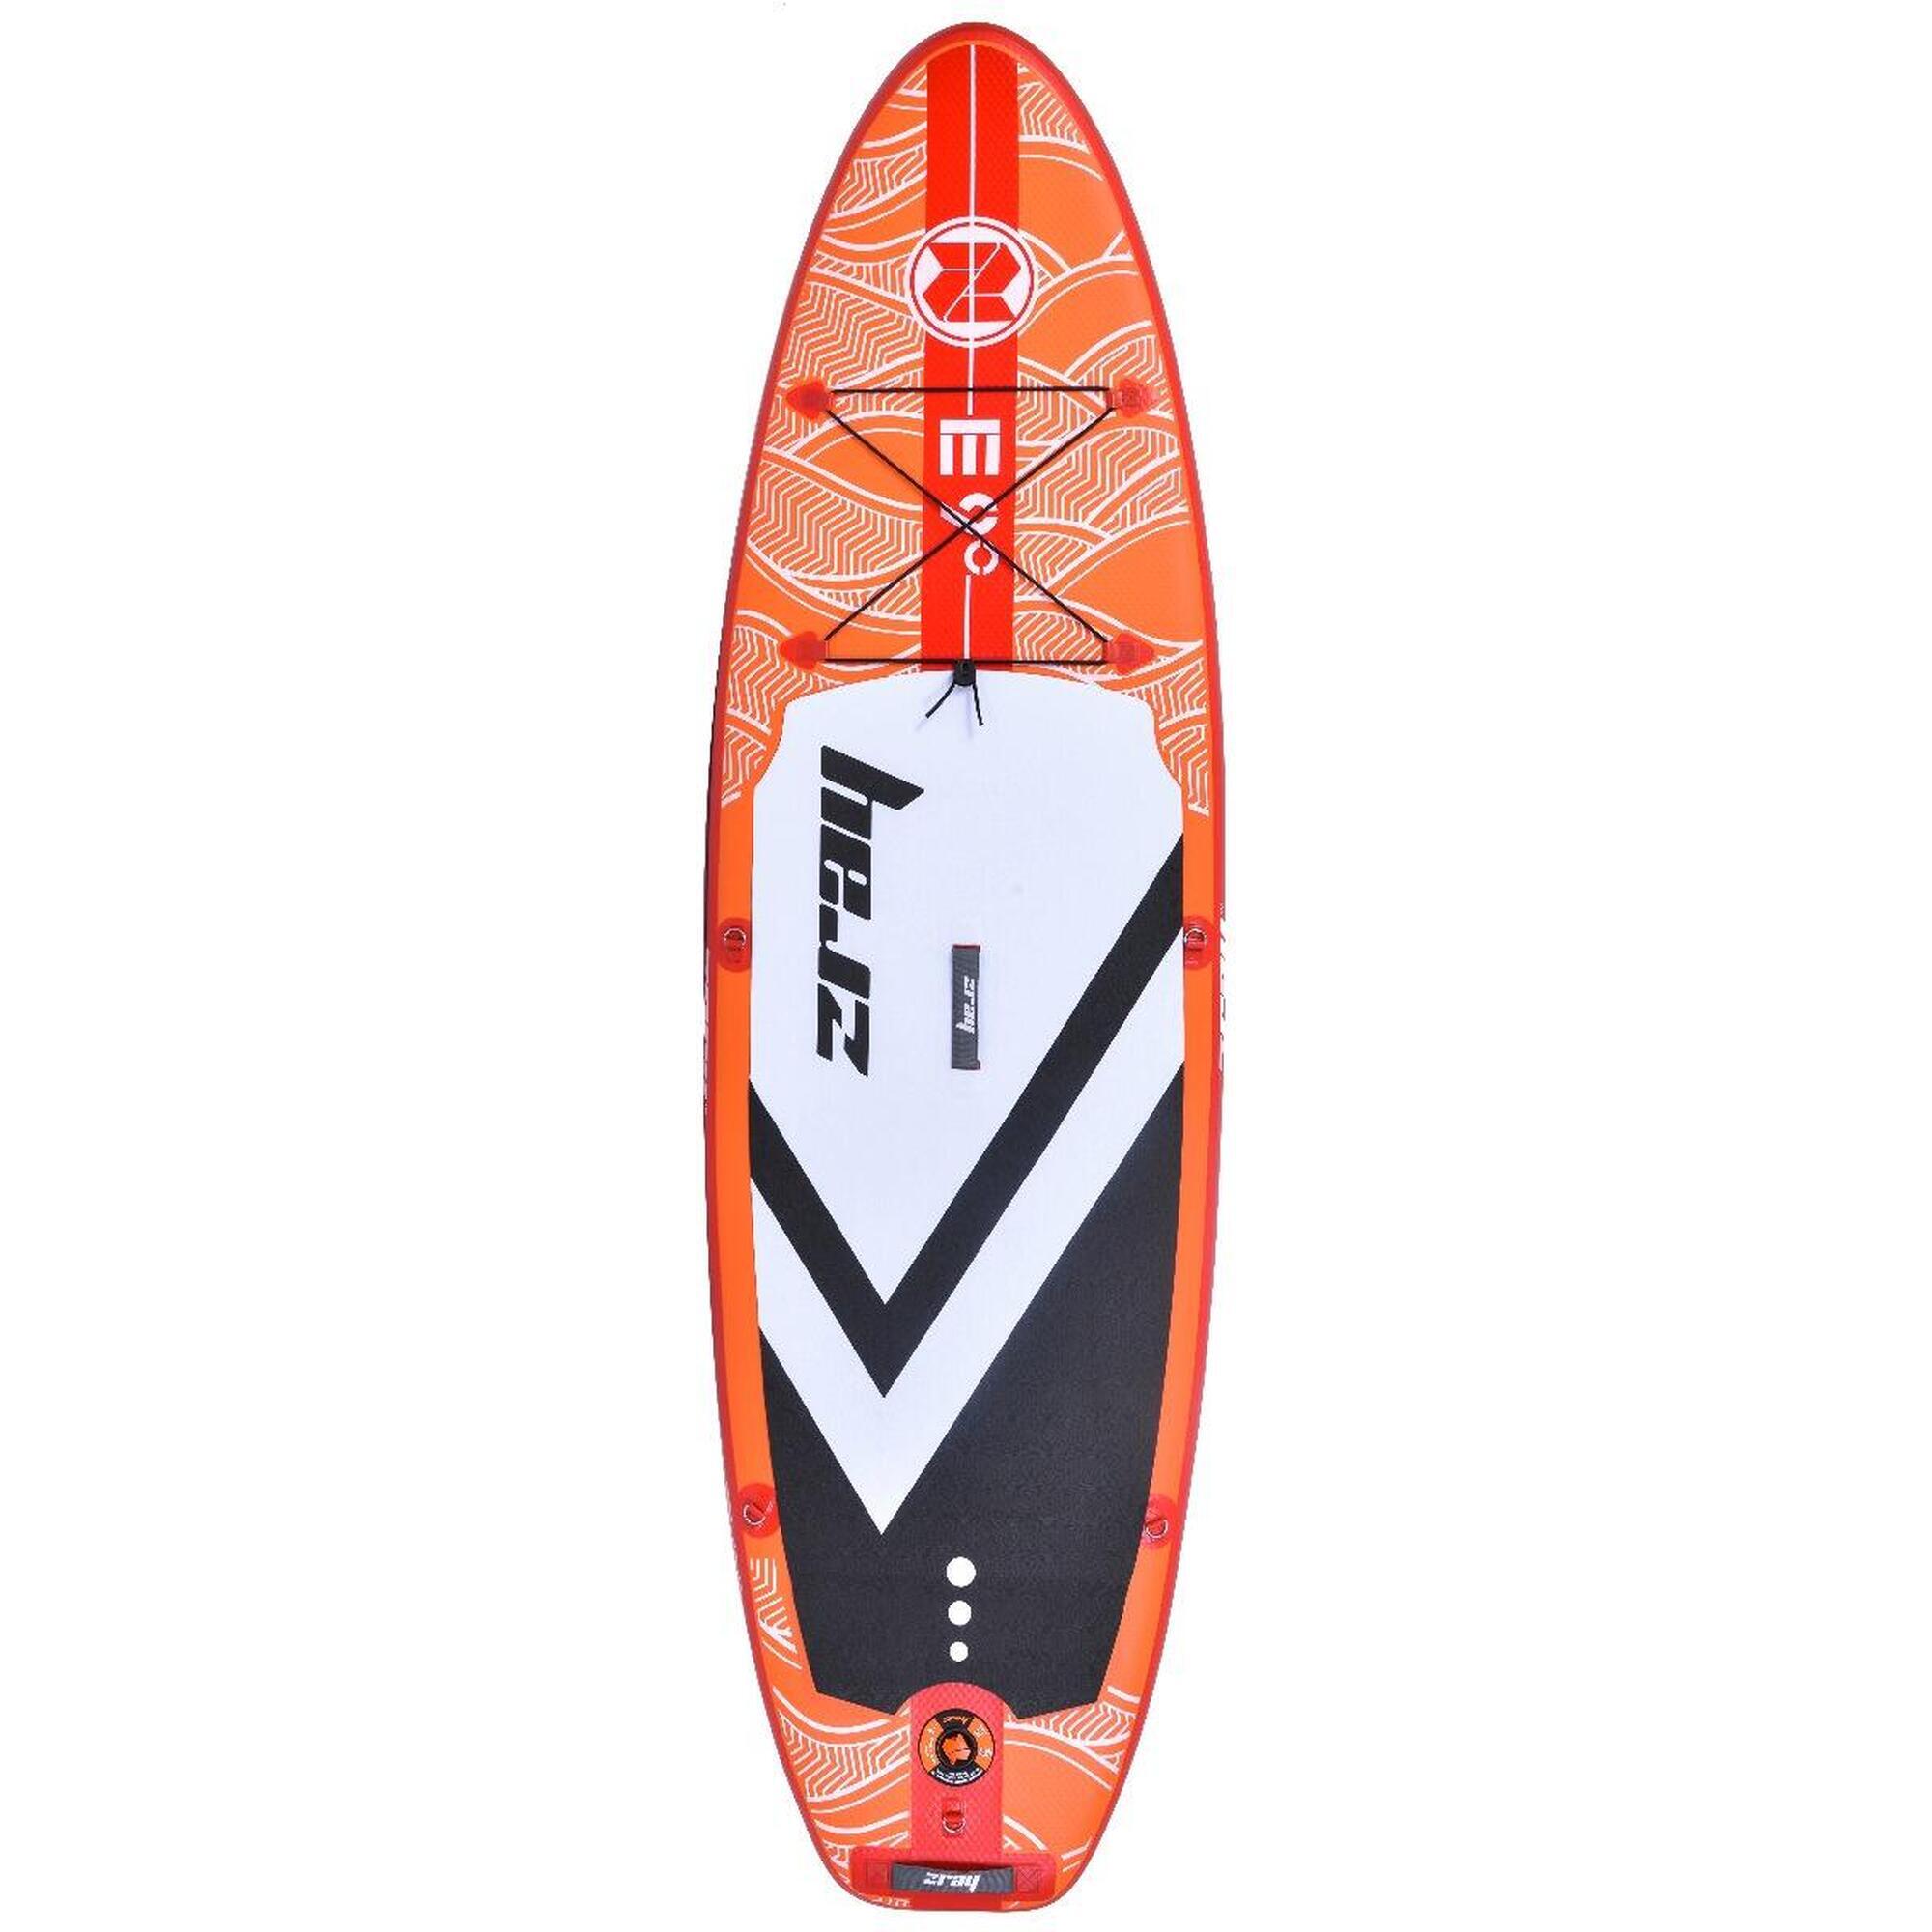 Pack paddle gonflable E9 9'